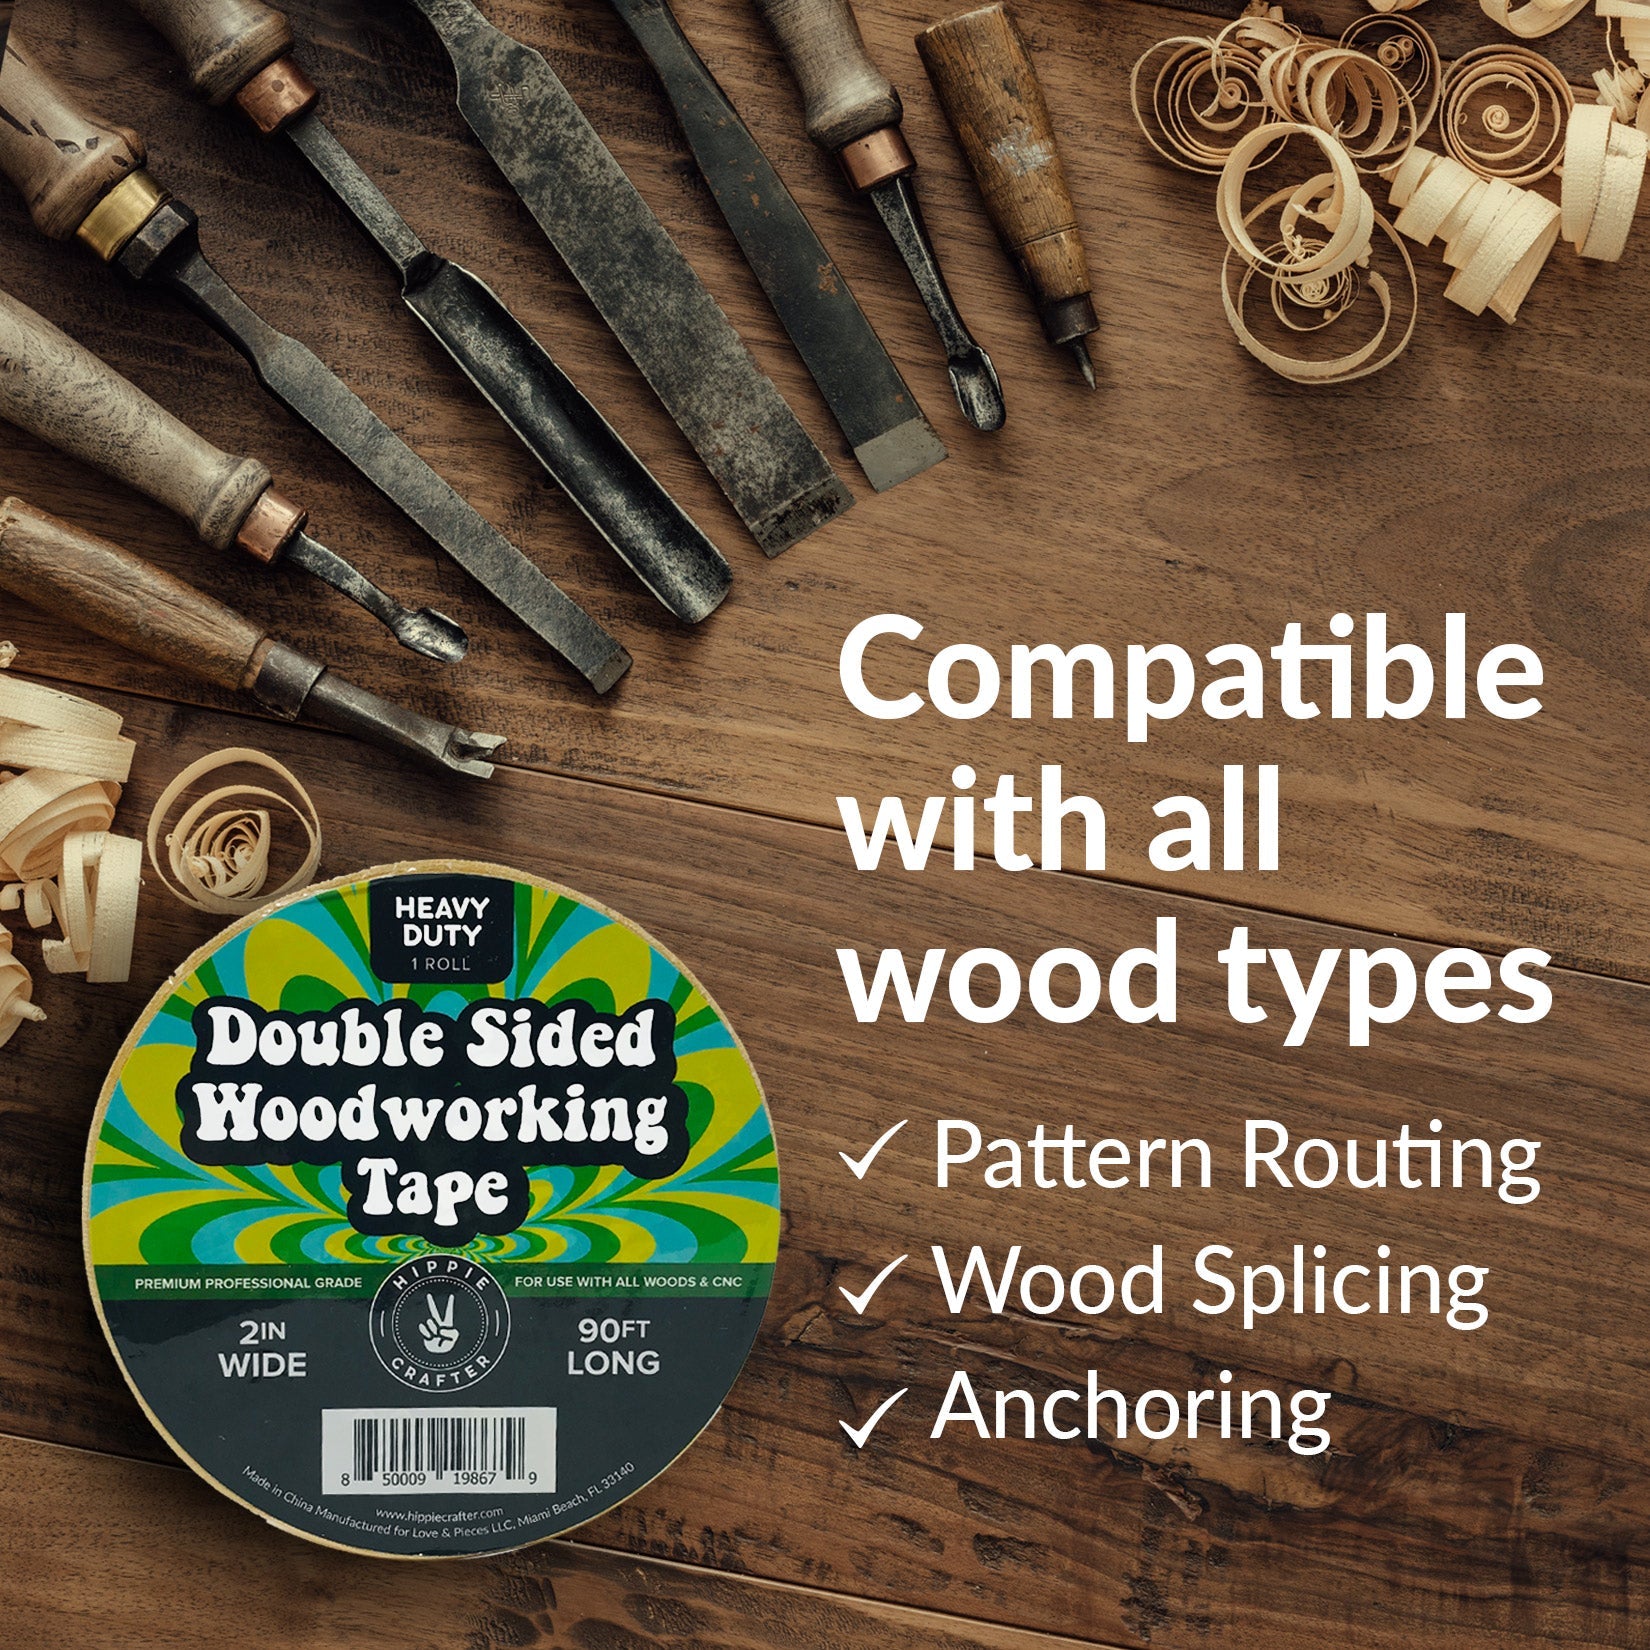 The Best Double Sided Tape for Woodworking - Teaching Woodwork.com